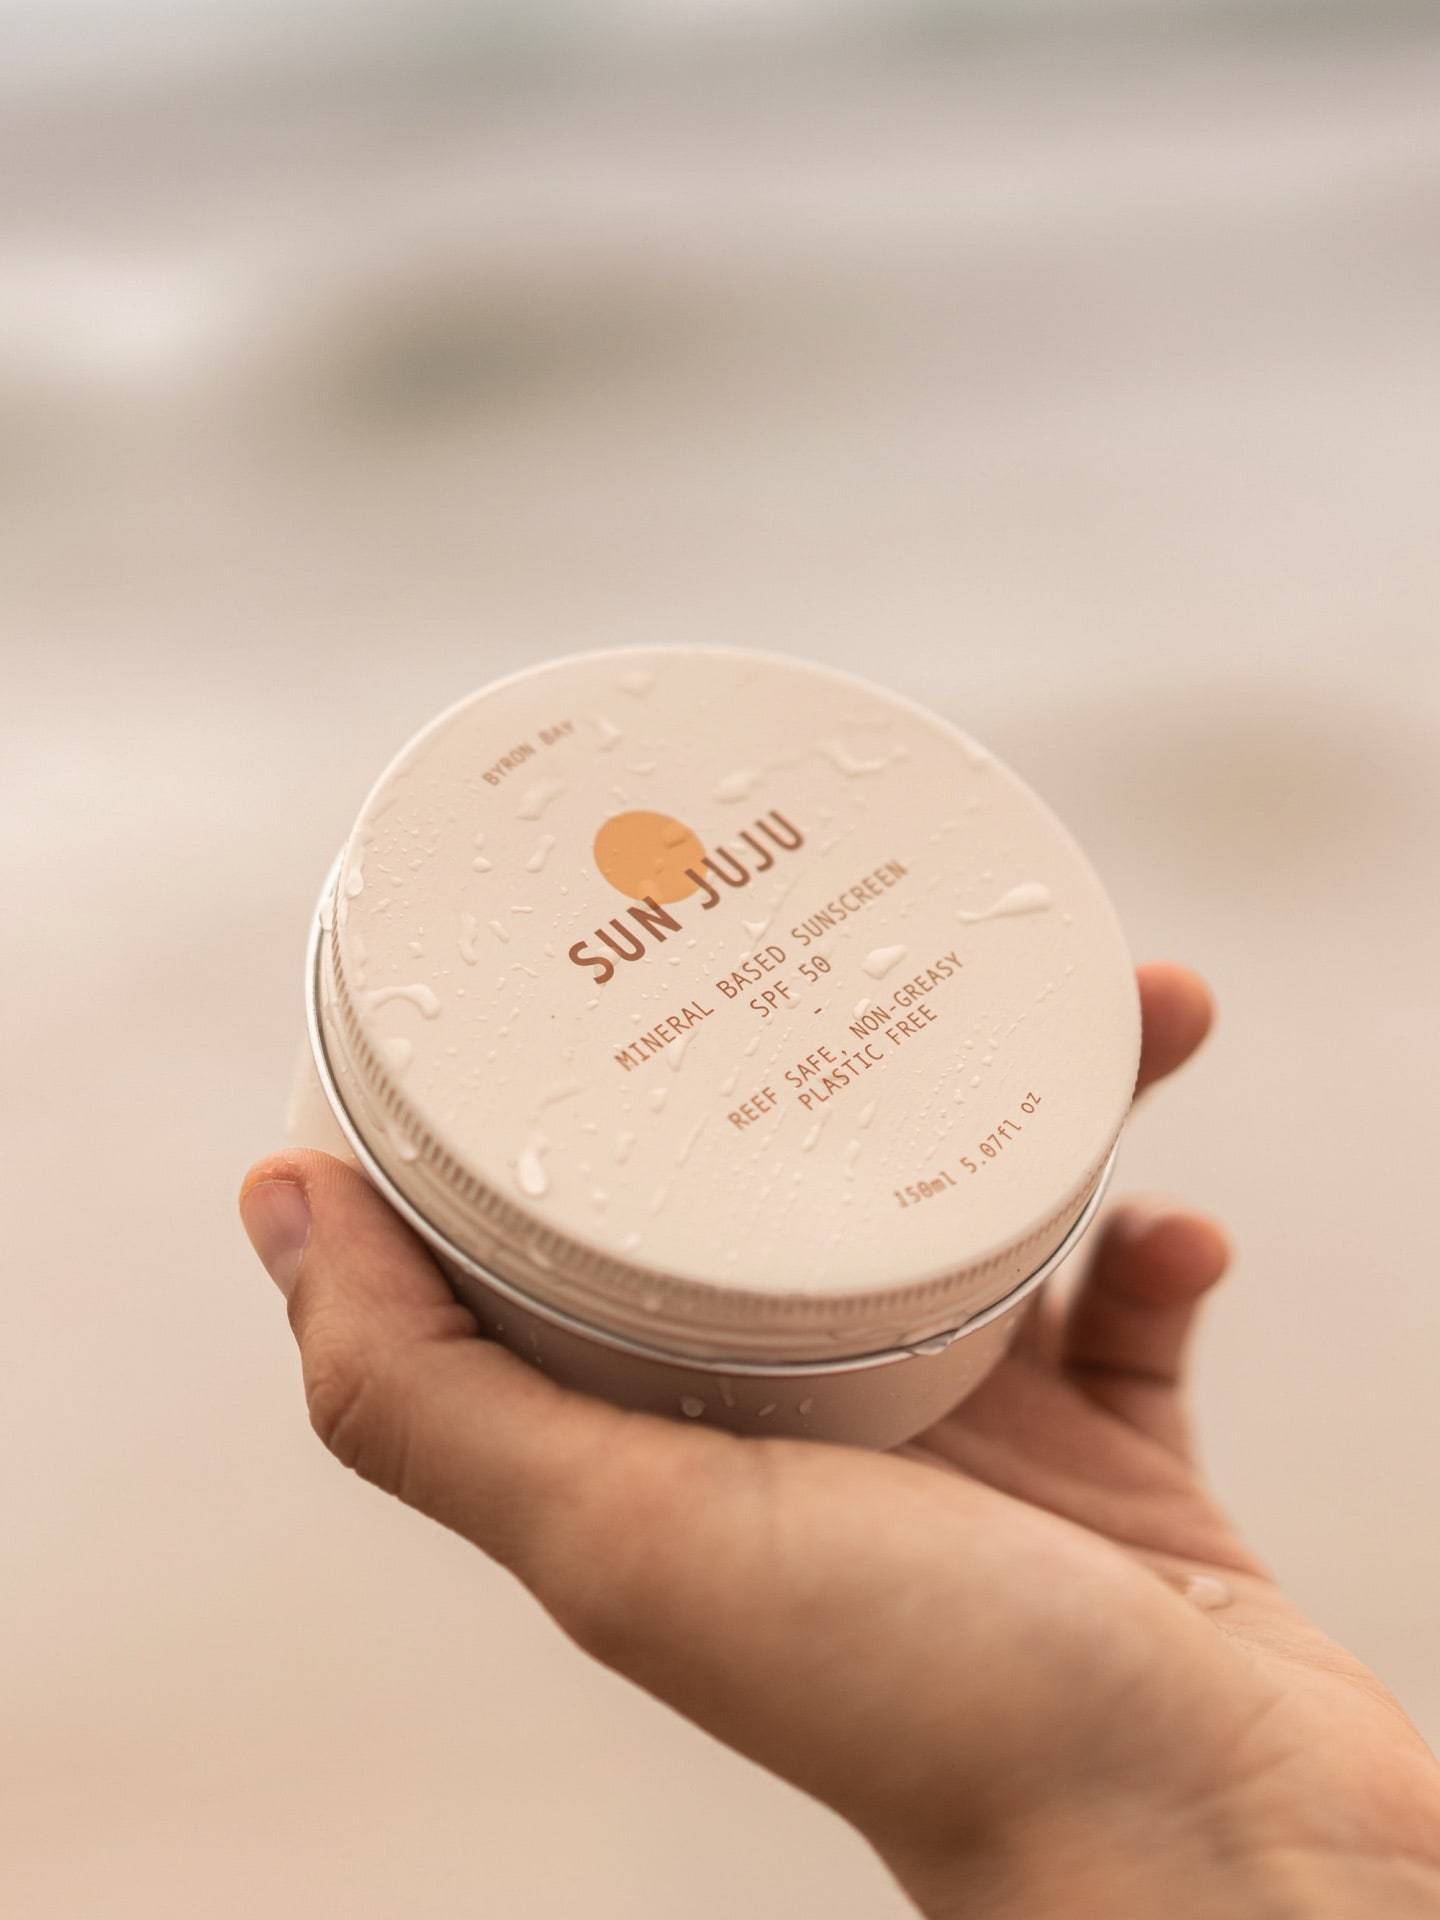 A person holding a tin of Sun Juju SPF50 Sunscreen for Face & Body ⋅ Hydrating Reef Safe – 100𝚐 on the beach.